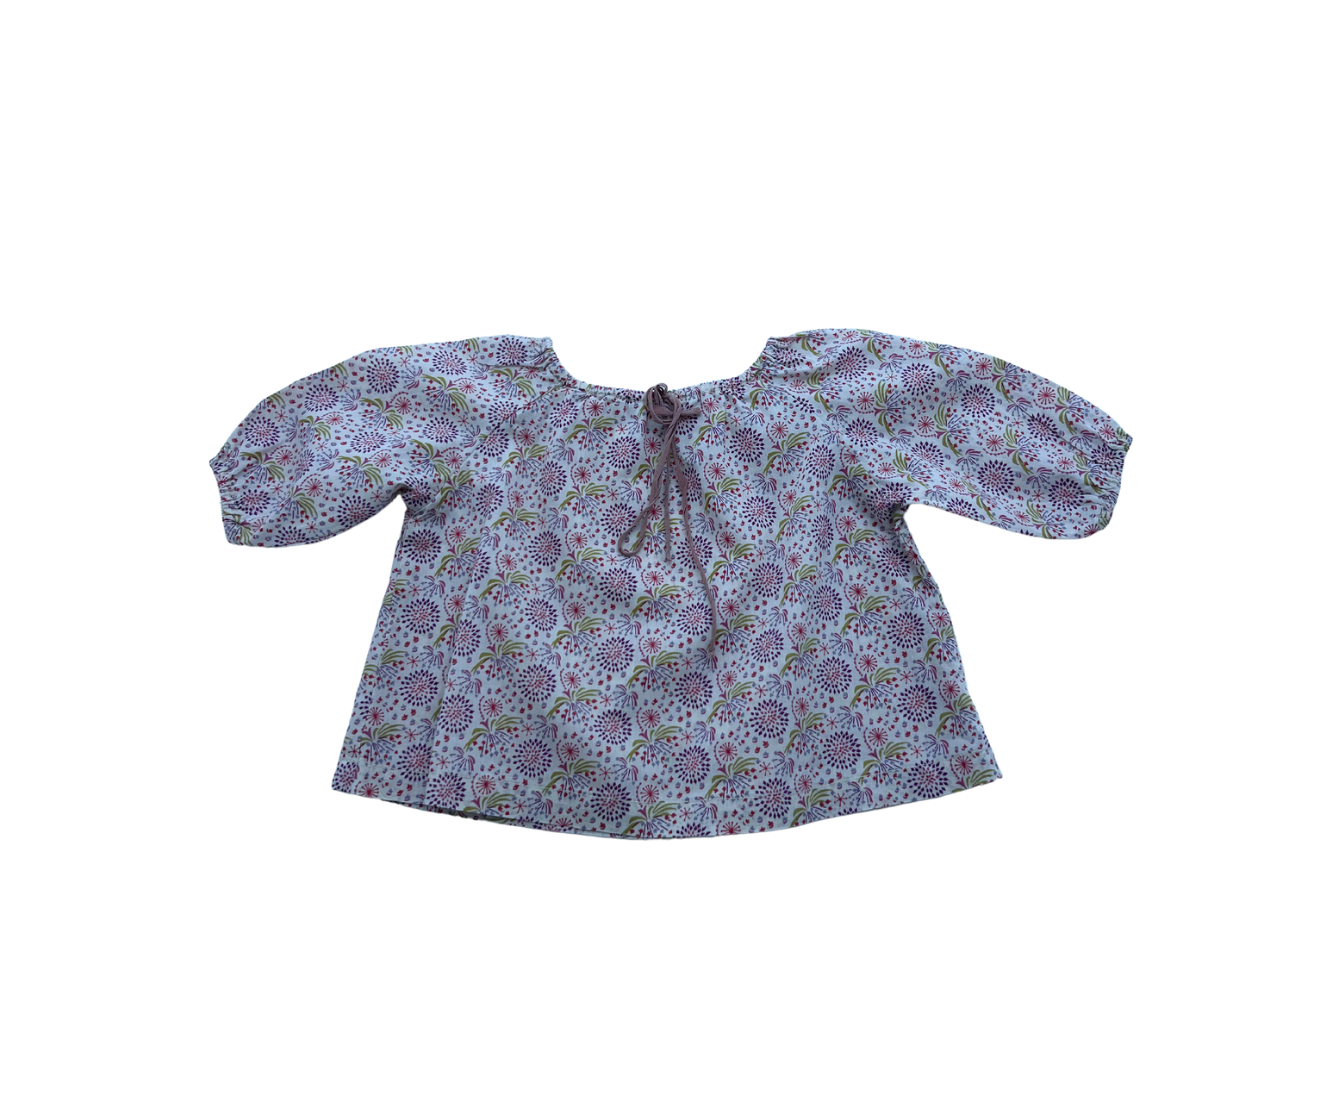 WOLF Y ARE-TU - Blouse - 9 months